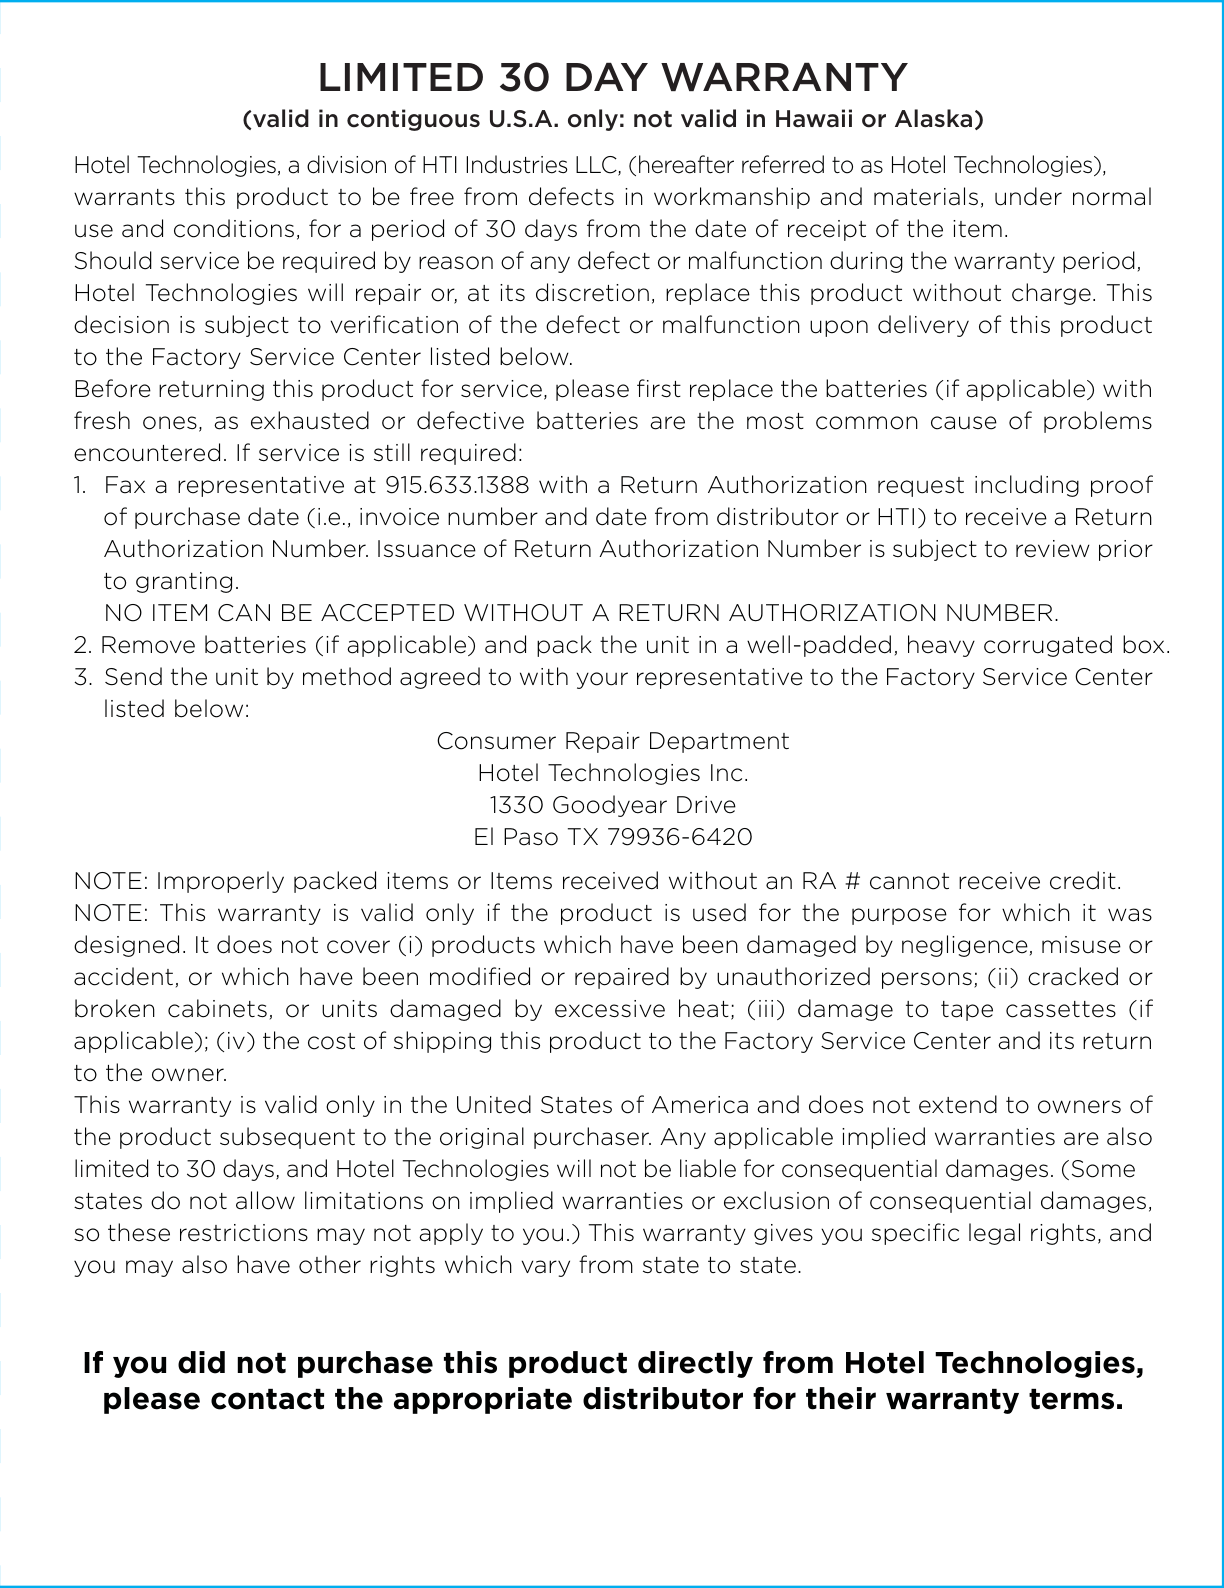 Hotel Technologies, a division of HTI Industries LLC, (hereafter referred to as Hotel Technologies), warrants this product to be free from defects in workmanship and materials, under normal use and conditions, for a period of 30 days from the date of receipt of the item.Should service be required by reason of any defect or malfunction during the warranty period, Hotel Technologies will repair or, at its discretion, replace this product without charge. This decision is subject to veriﬁcation of the defect or malfunction upon delivery of this product to the Factory Service Center listed below.Before returning this product for service, please ﬁrst replace the batteries (if applicable) with fresh ones, as exhausted or defective batteries are the most common cause of problems encountered. If service is still required:1.  Fax a representative at 915.633.1388 with a Return Authorization request including proof of purchase date (i.e., invoice number and date from distributor or HTI) to receive a Return Authorization Number. Issuance of Return Authorization Number is subject to review prior to granting.  NO ITEM CAN BE ACCEPTED WITHOUT A RETURN AUTHORIZATION NUMBER.2. Remove batteries (if applicable) and pack the unit in a well-padded, heavy corrugated box.3.  Send the unit by method agreed to with your representative to the Factory Service Center listed below:Consumer Repair DepartmentHotel Technologies Inc.1330 Goodyear DriveEl Paso TX 79936-6420NOTE: Improperly packed items or Items received without an RA # cannot receive credit.NOTE: This warranty is valid only if the product is used for the purpose for which it was designed. It does not cover (i) products which have been damaged by negligence, misuse or accident, or which have been modiﬁed or repaired by unauthorized persons; (ii) cracked or broken cabinets, or units damaged by excessive heat; (iii) damage to tape cassettes (if applicable); (iv) the cost of shipping this product to the Factory Service Center and its return to the owner.This warranty is valid only in the United States of America and does not extend to owners of the product subsequent to the original purchaser. Any applicable implied warranties are also limited to 30 days, and Hotel Technologies will not be liable for consequential damages. (Some states do not allow limitations on implied warranties or exclusion of consequential damages, so these restrictions may not apply to you.) This warranty gives you speciﬁc legal rights, and you may also have other rights which vary from state to state.If you did not purchase this product directly from Hotel Technologies,please contact the appropriate distributor for their warranty terms.LIMITED 30 DAY WARRANTY(valid in contiguous U.S.A. only: not valid in Hawaii or Alaska)